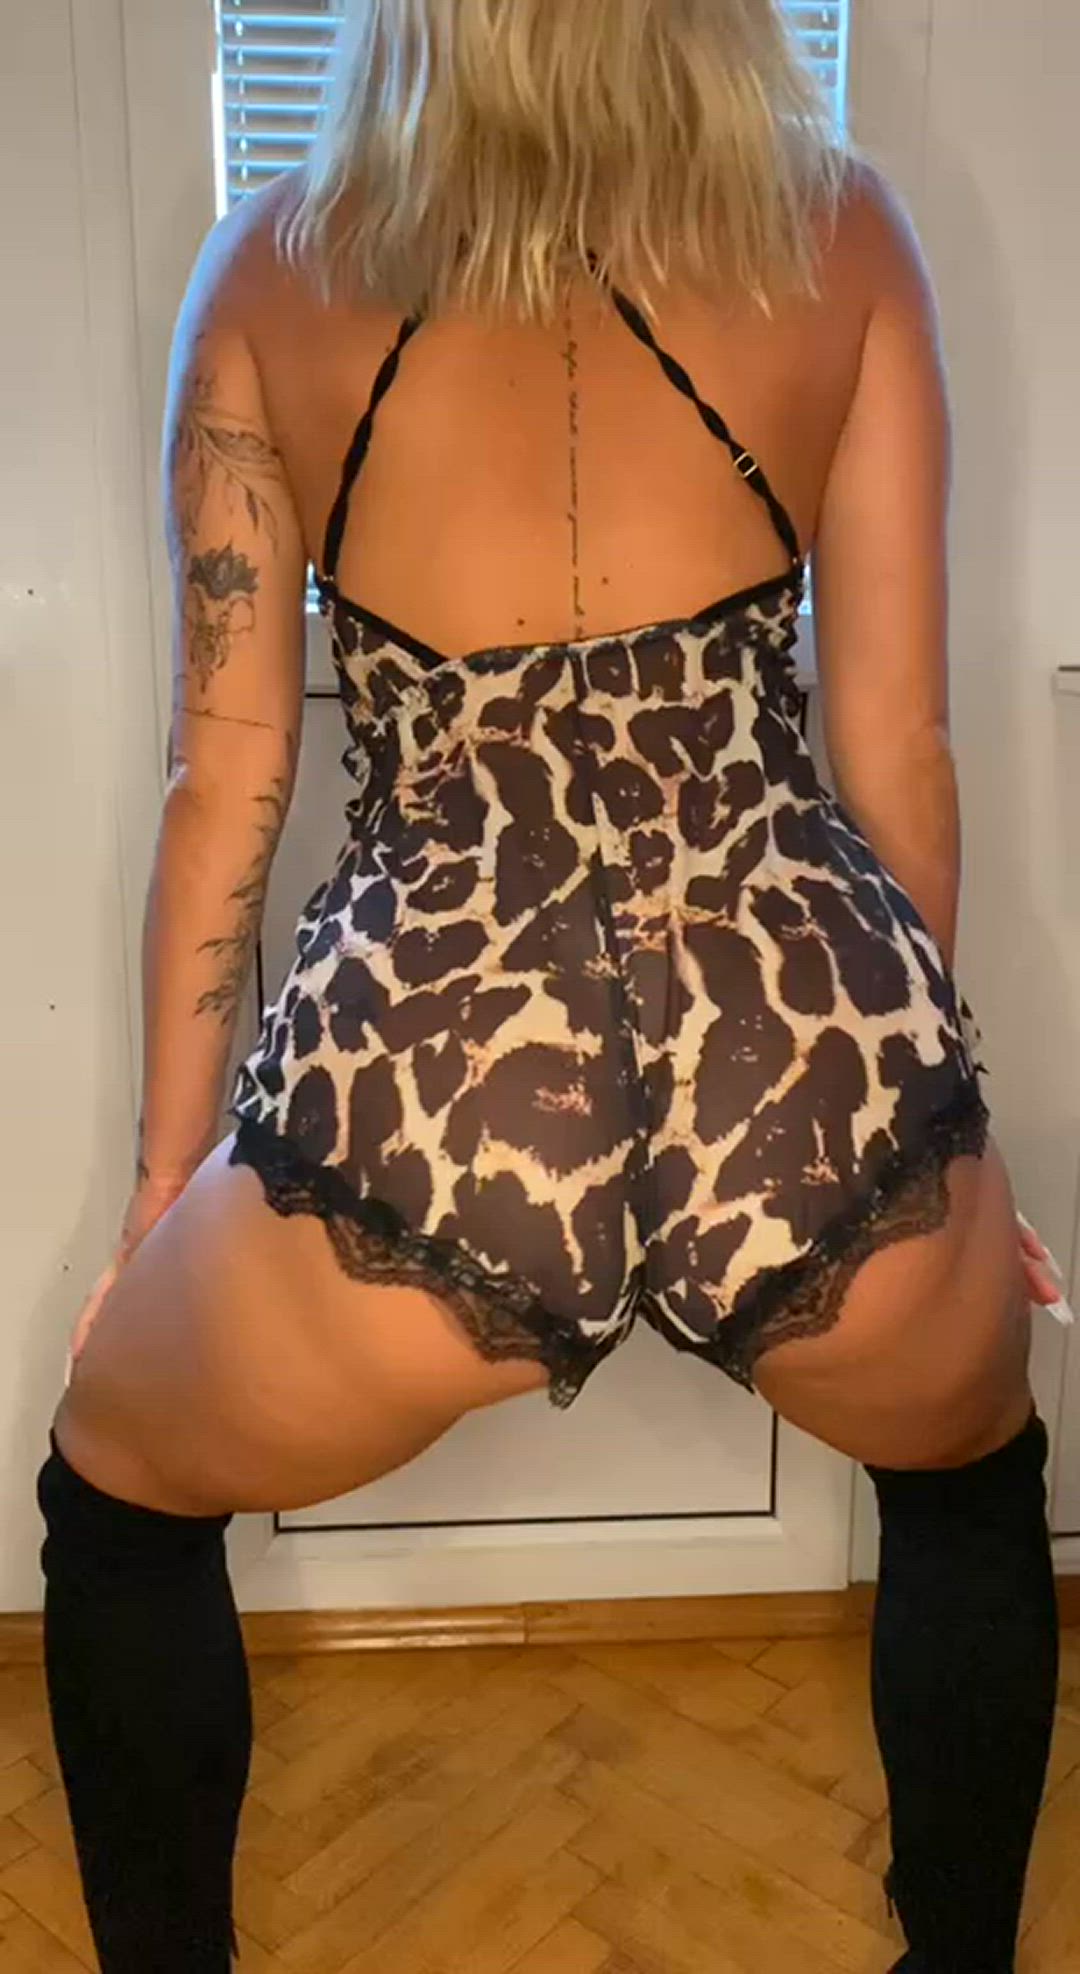 Ass porn video with onlyfans model anaismoana <strong>@sianaanaom</strong>